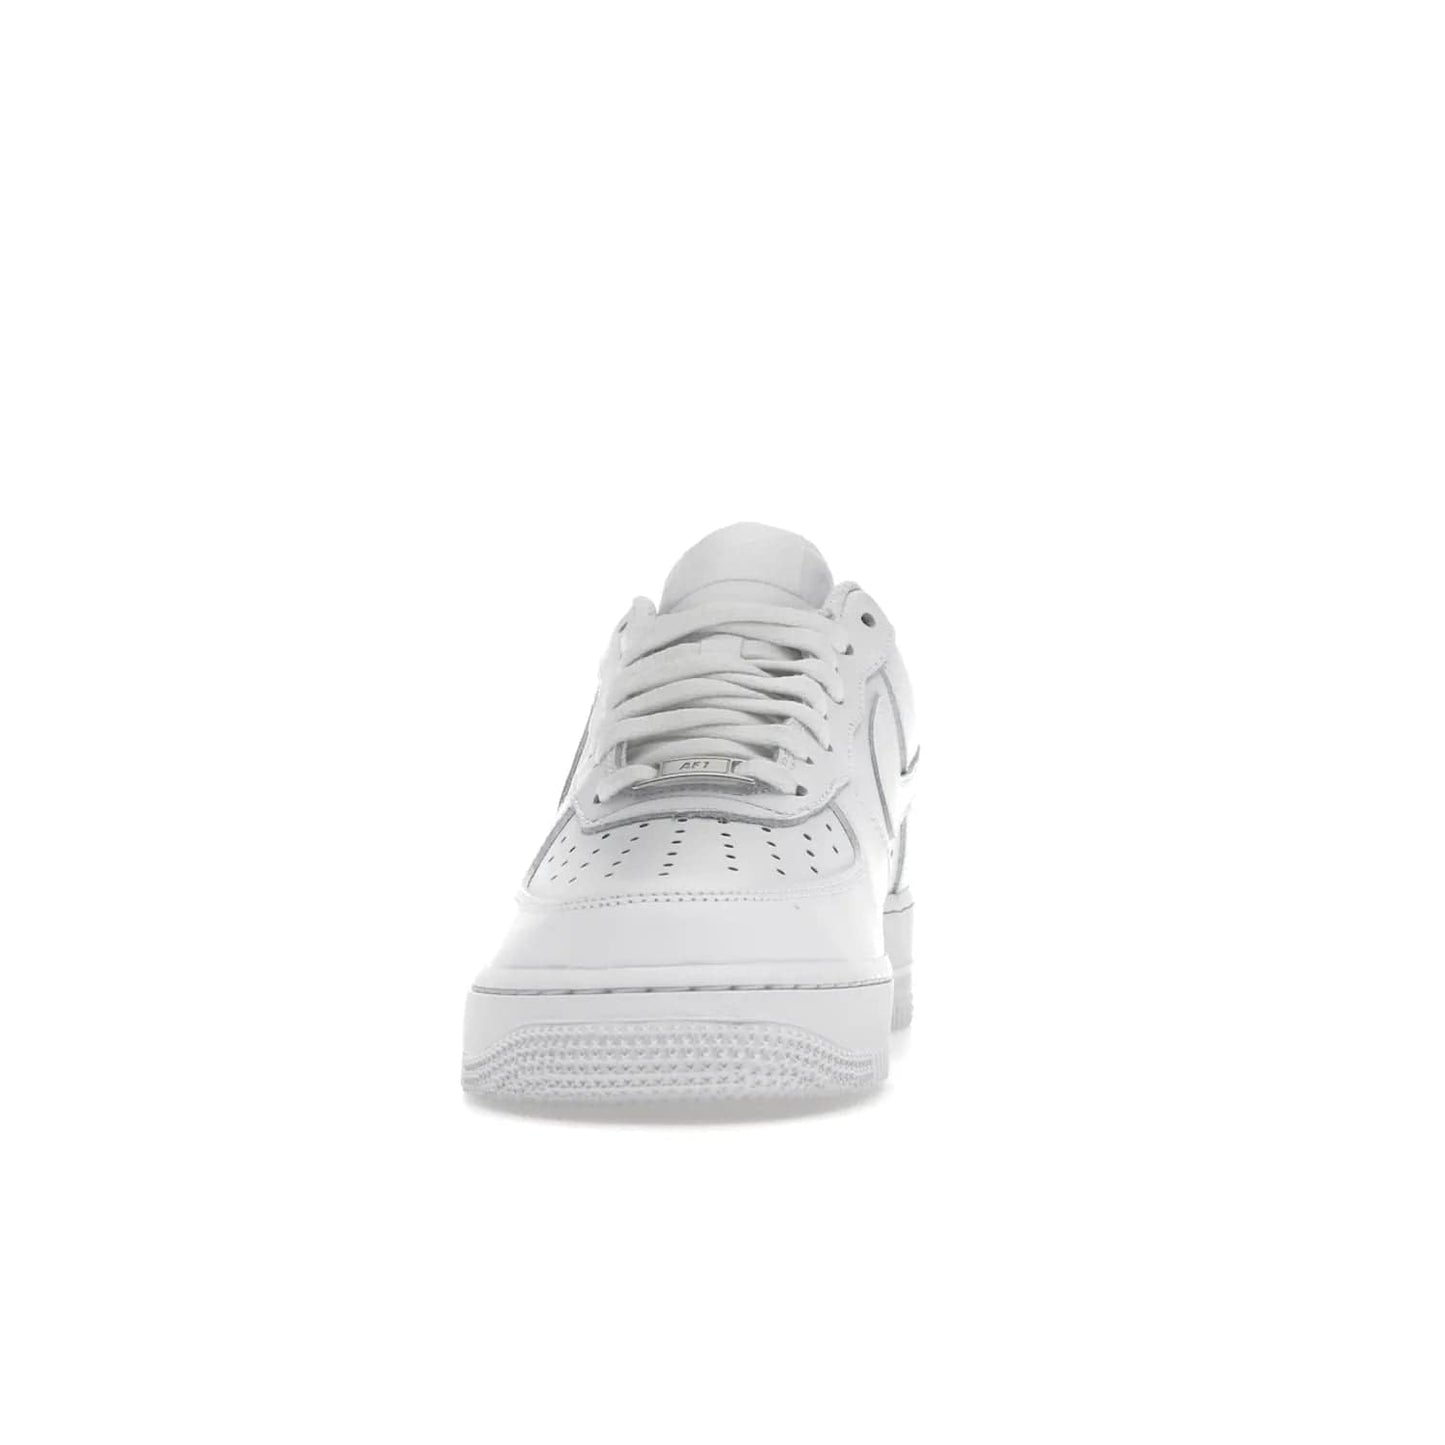 Nike Air Force 1 Low '07 White (Women's) - Image 11 - Only at www.BallersClubKickz.com - Timeless classic sneaker updated with white leather upper and perforated toe box. Nike heel embroidery and white sole. Released January 2018.